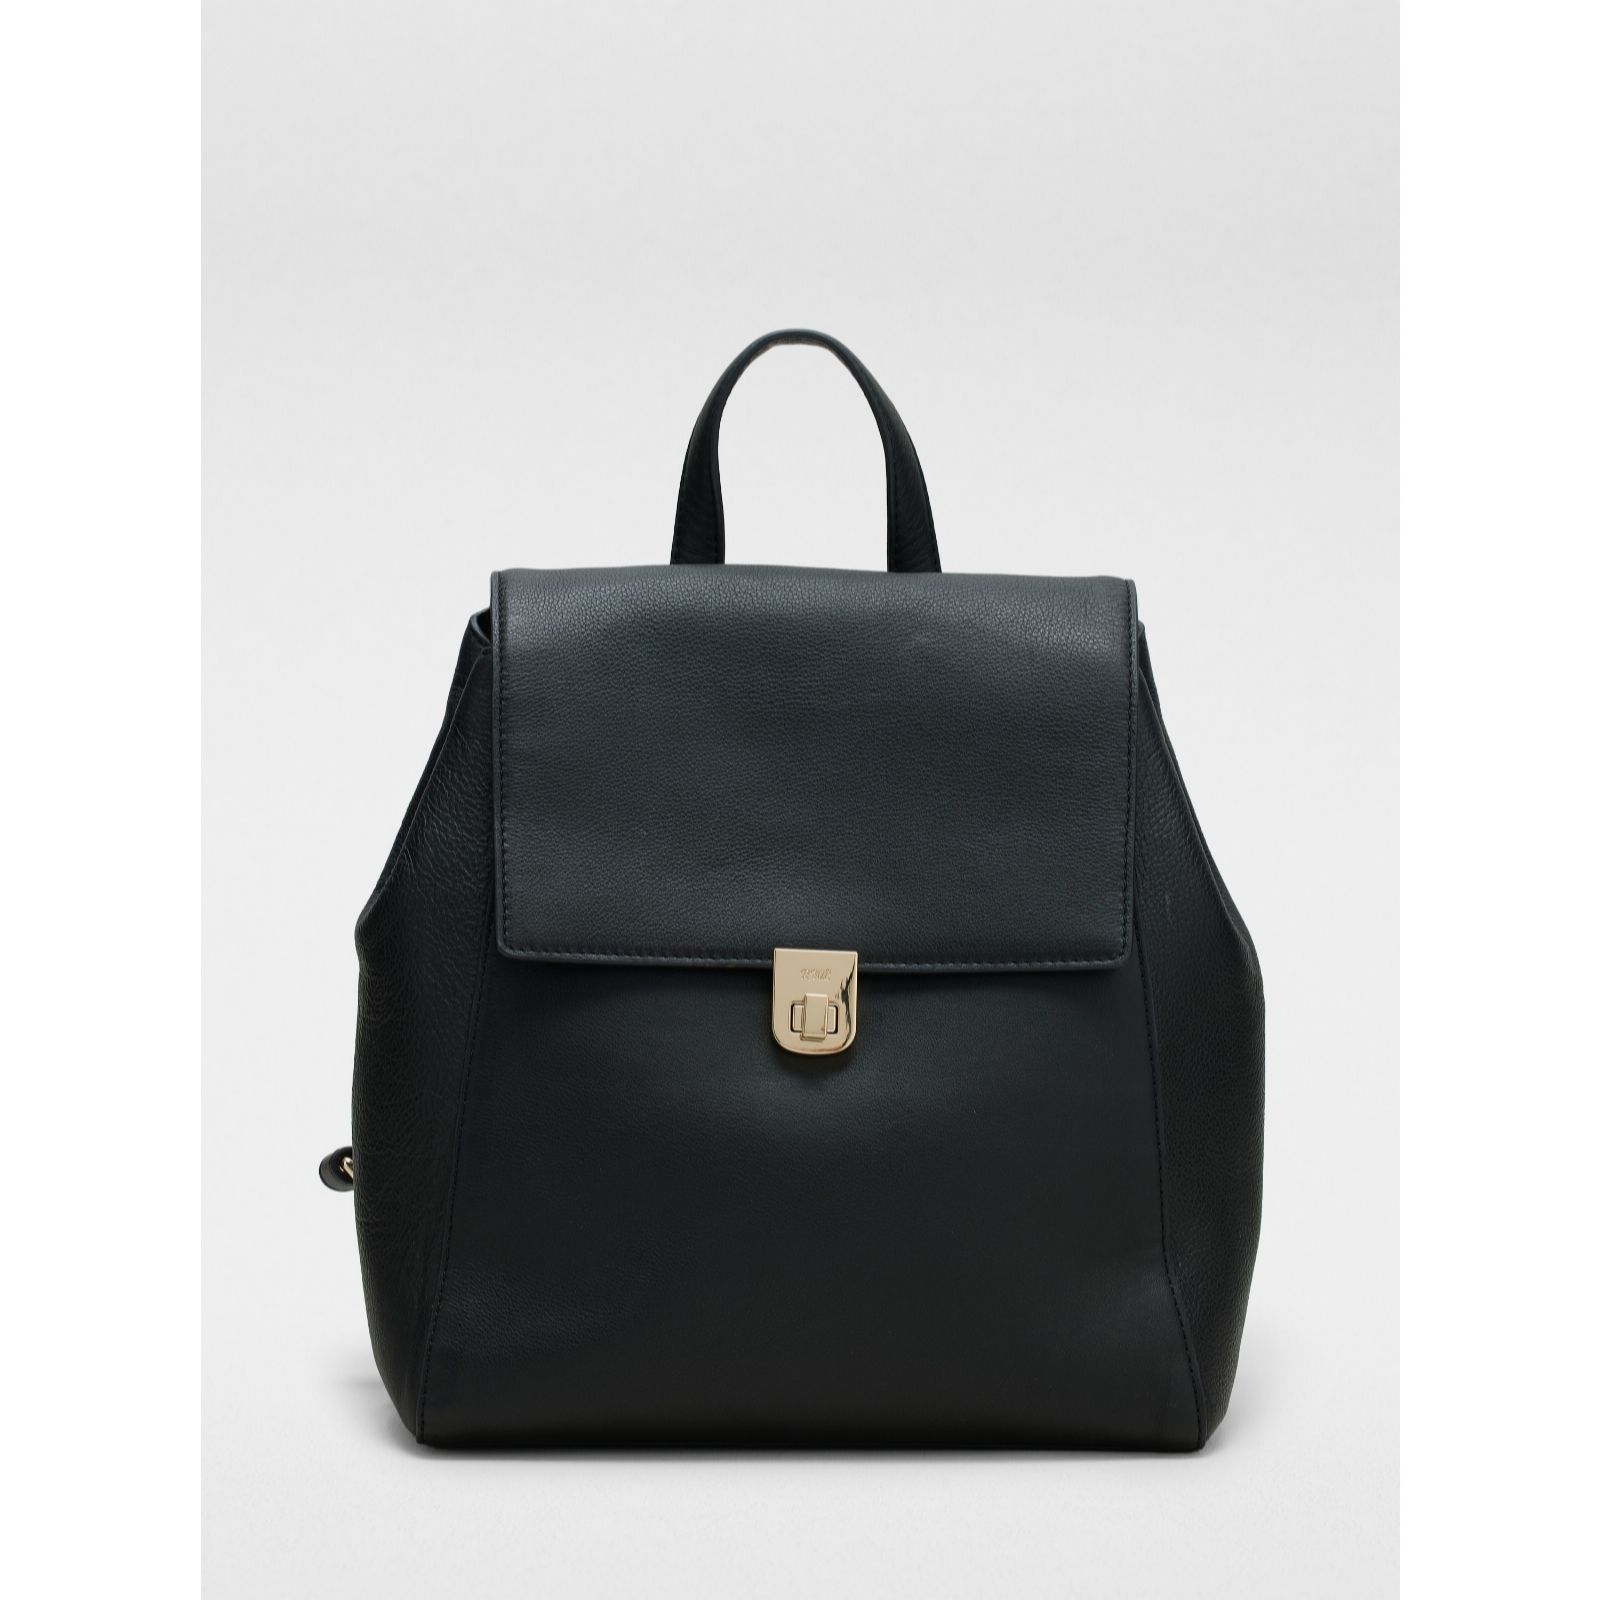 Ruth Langsford Leather Backpack - QVC UK